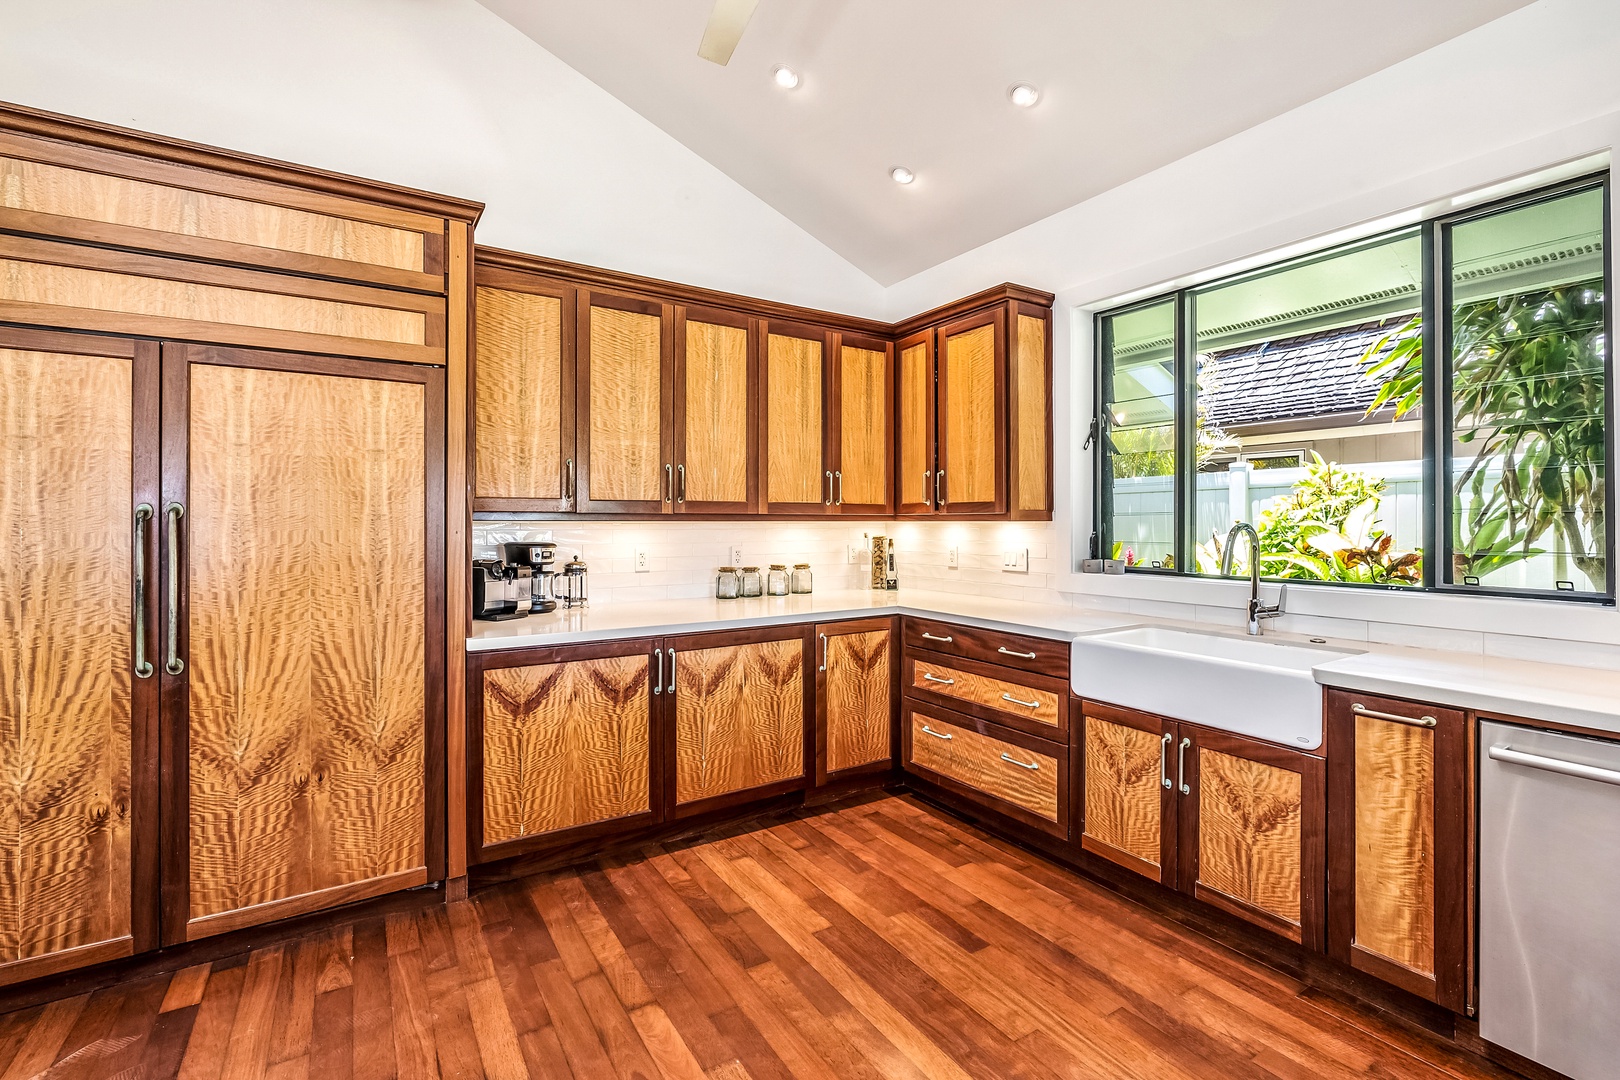 Kailua Vacation Rentals, Hale Ohana - There's a large basin sink with garden views